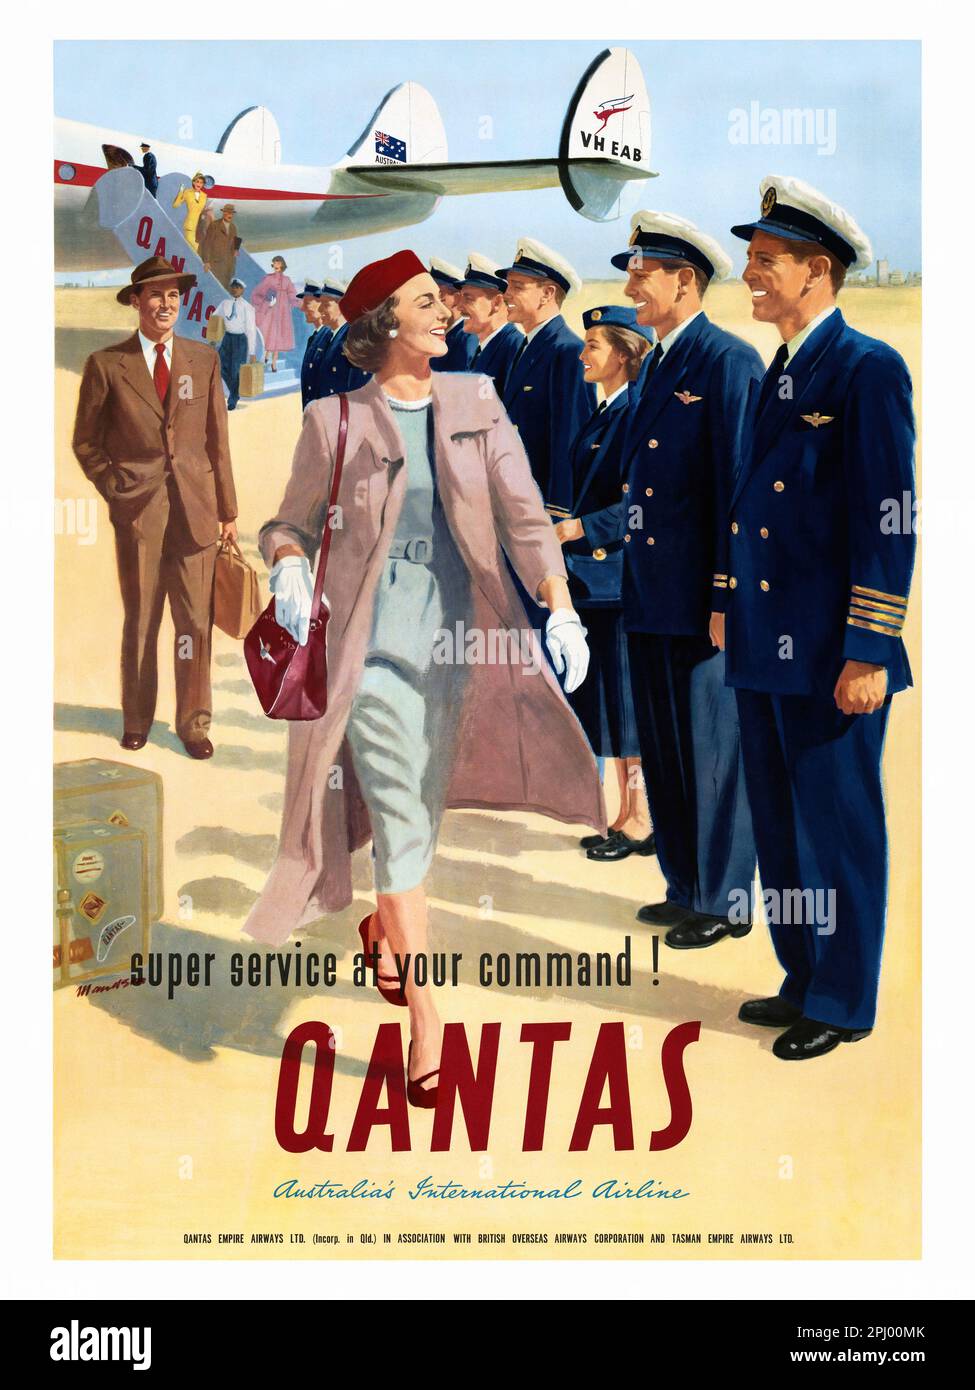 Super service at your command. Qantas. Australia's international airline by John Maudson (1918-1996). Poster published in 1947 in Australia. Stock Photo